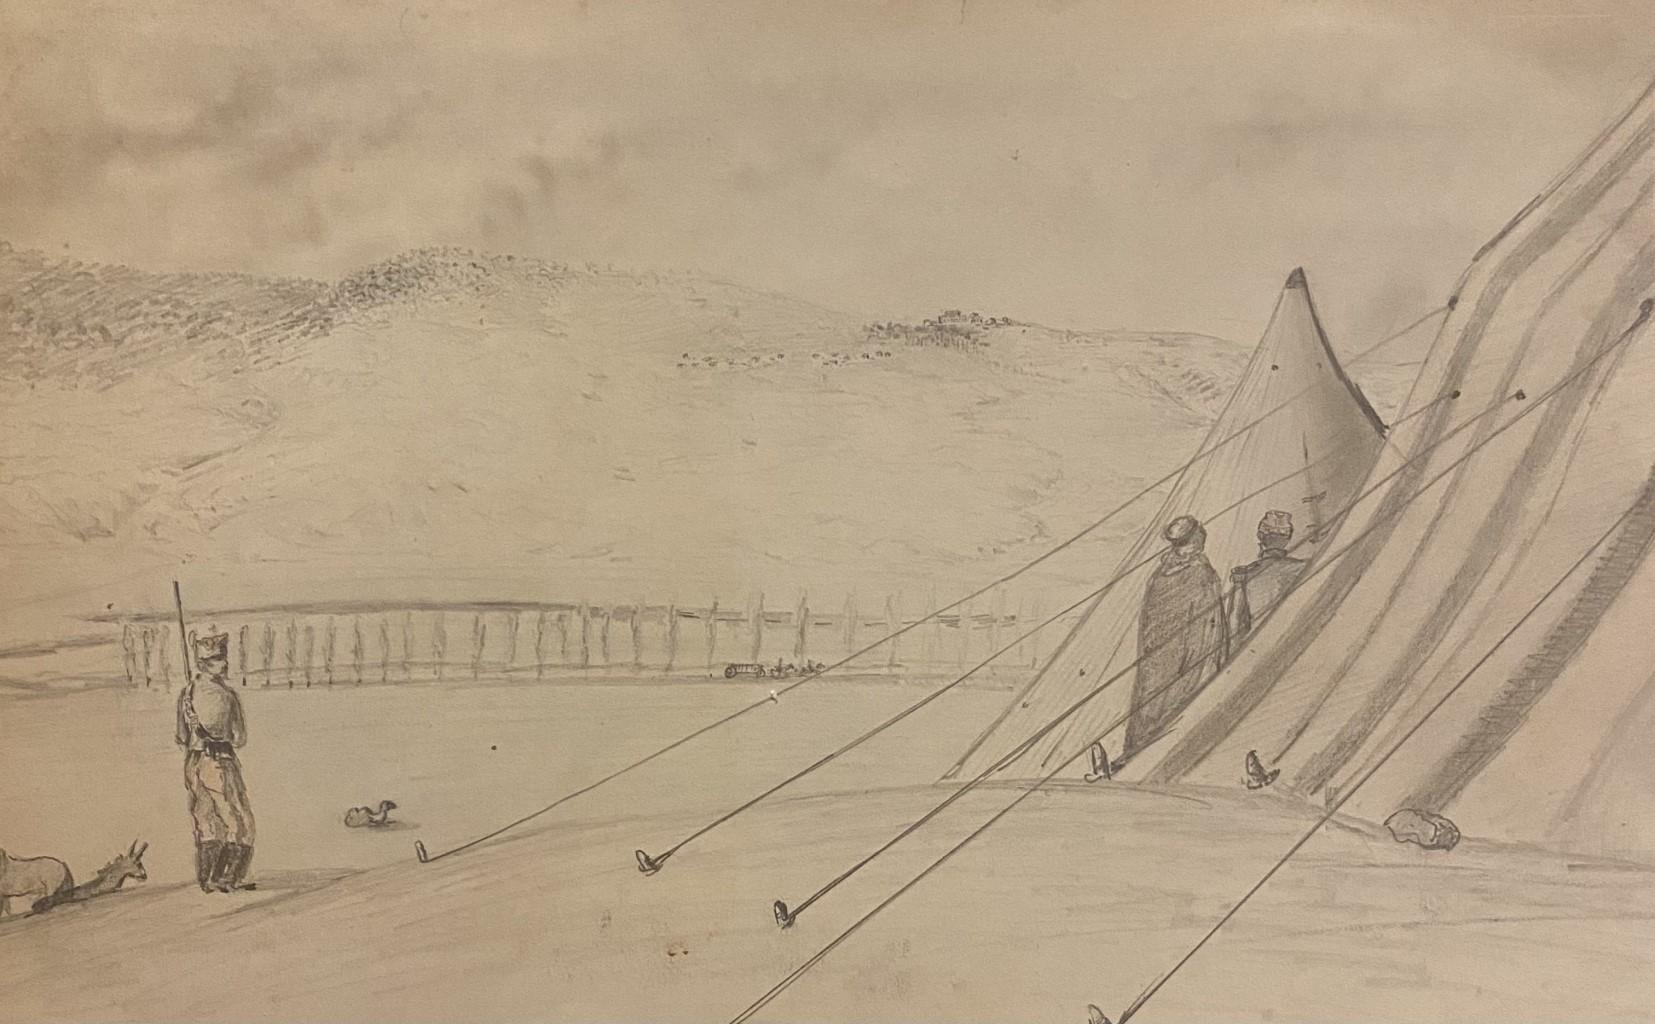 Unknown Figurative Art - Camp of Soldiers - Original Pencil on Paper - 19th Century